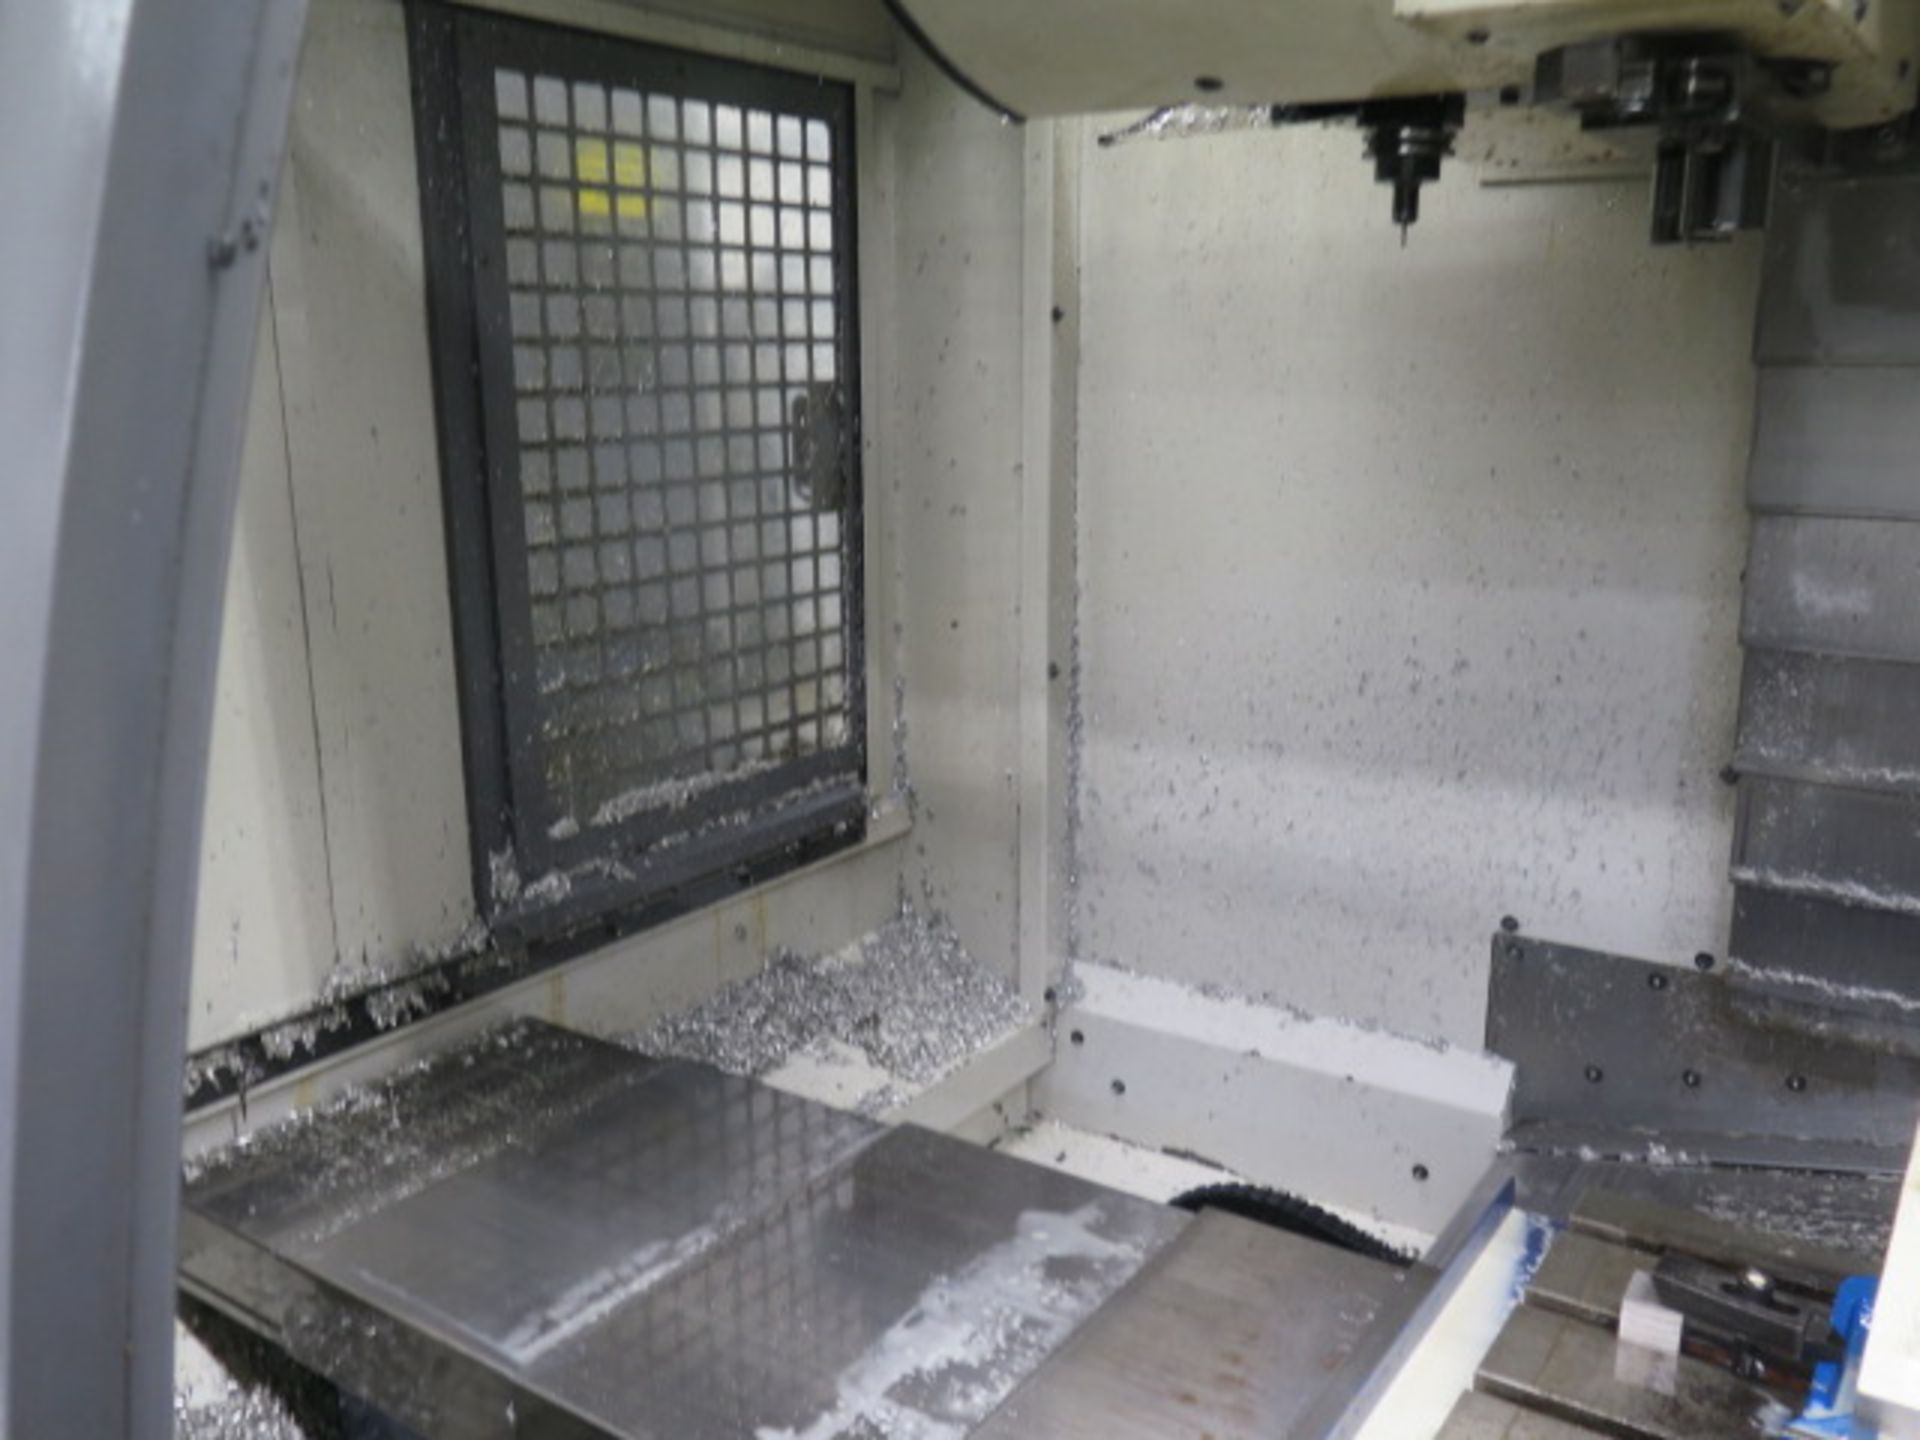 2006 YCM XV-1020A CNC VMC s/n 1129 w/ Fanuc MXP-200i Controls, Hand Wheel, SOLD AS IS - Image 15 of 20